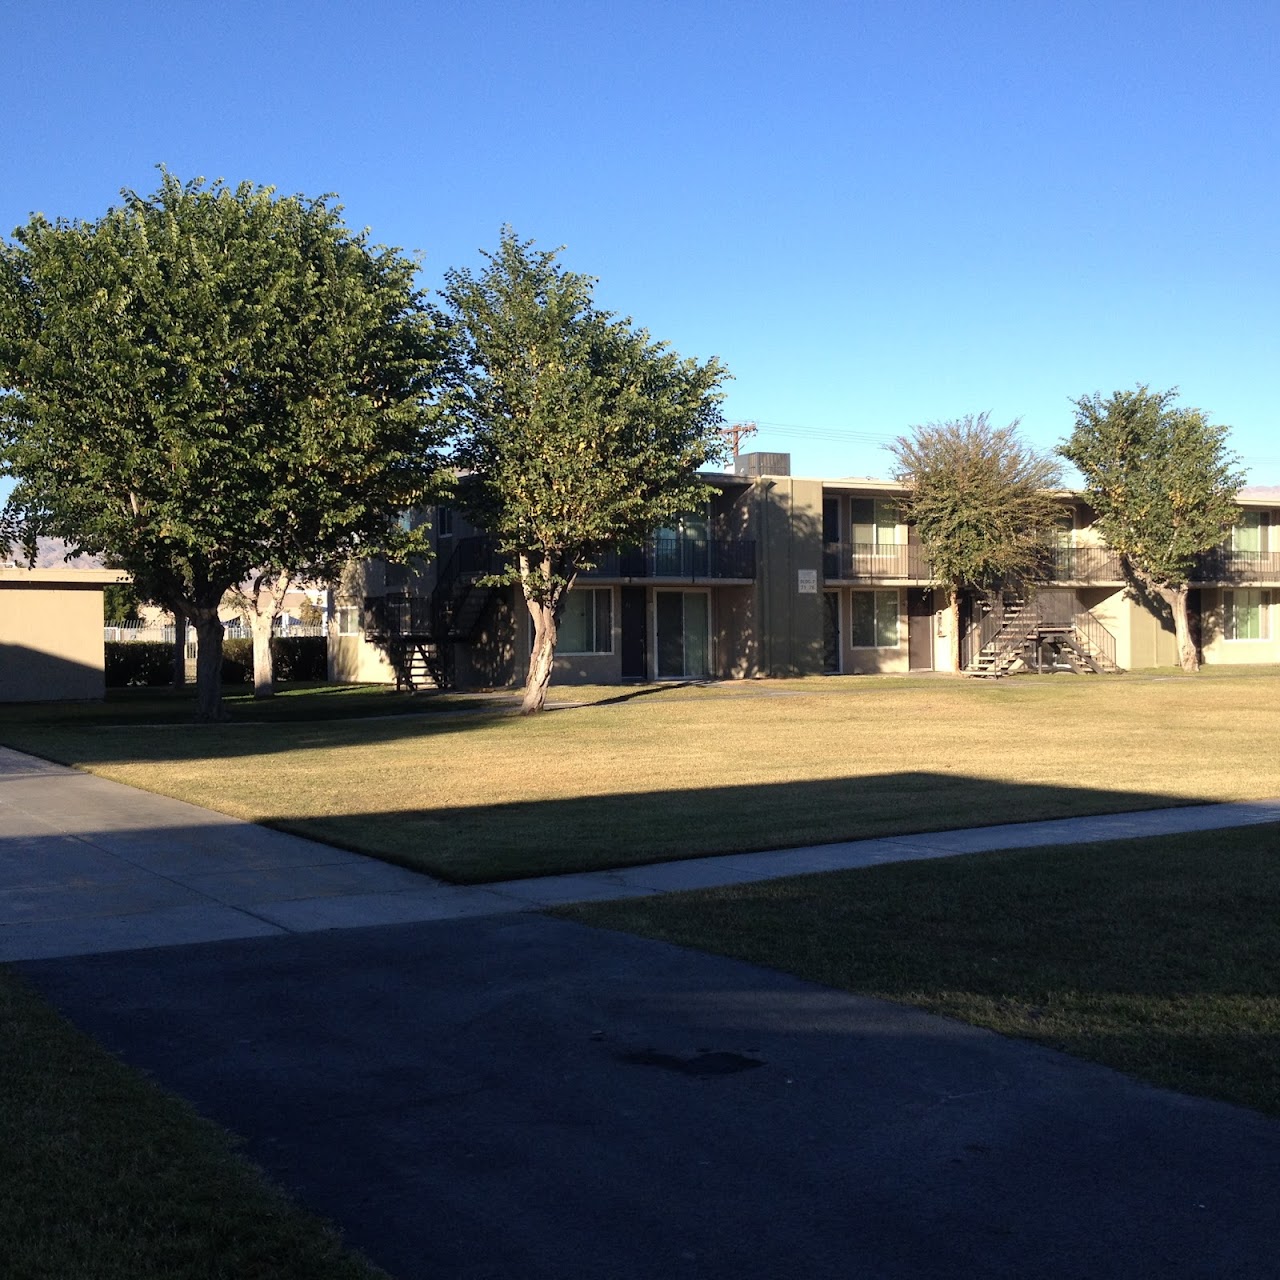 Photo of PALO VERDE APTS (INDIO). Affordable housing located at 44720 PALO VERDE ST INDIO, CA 92201